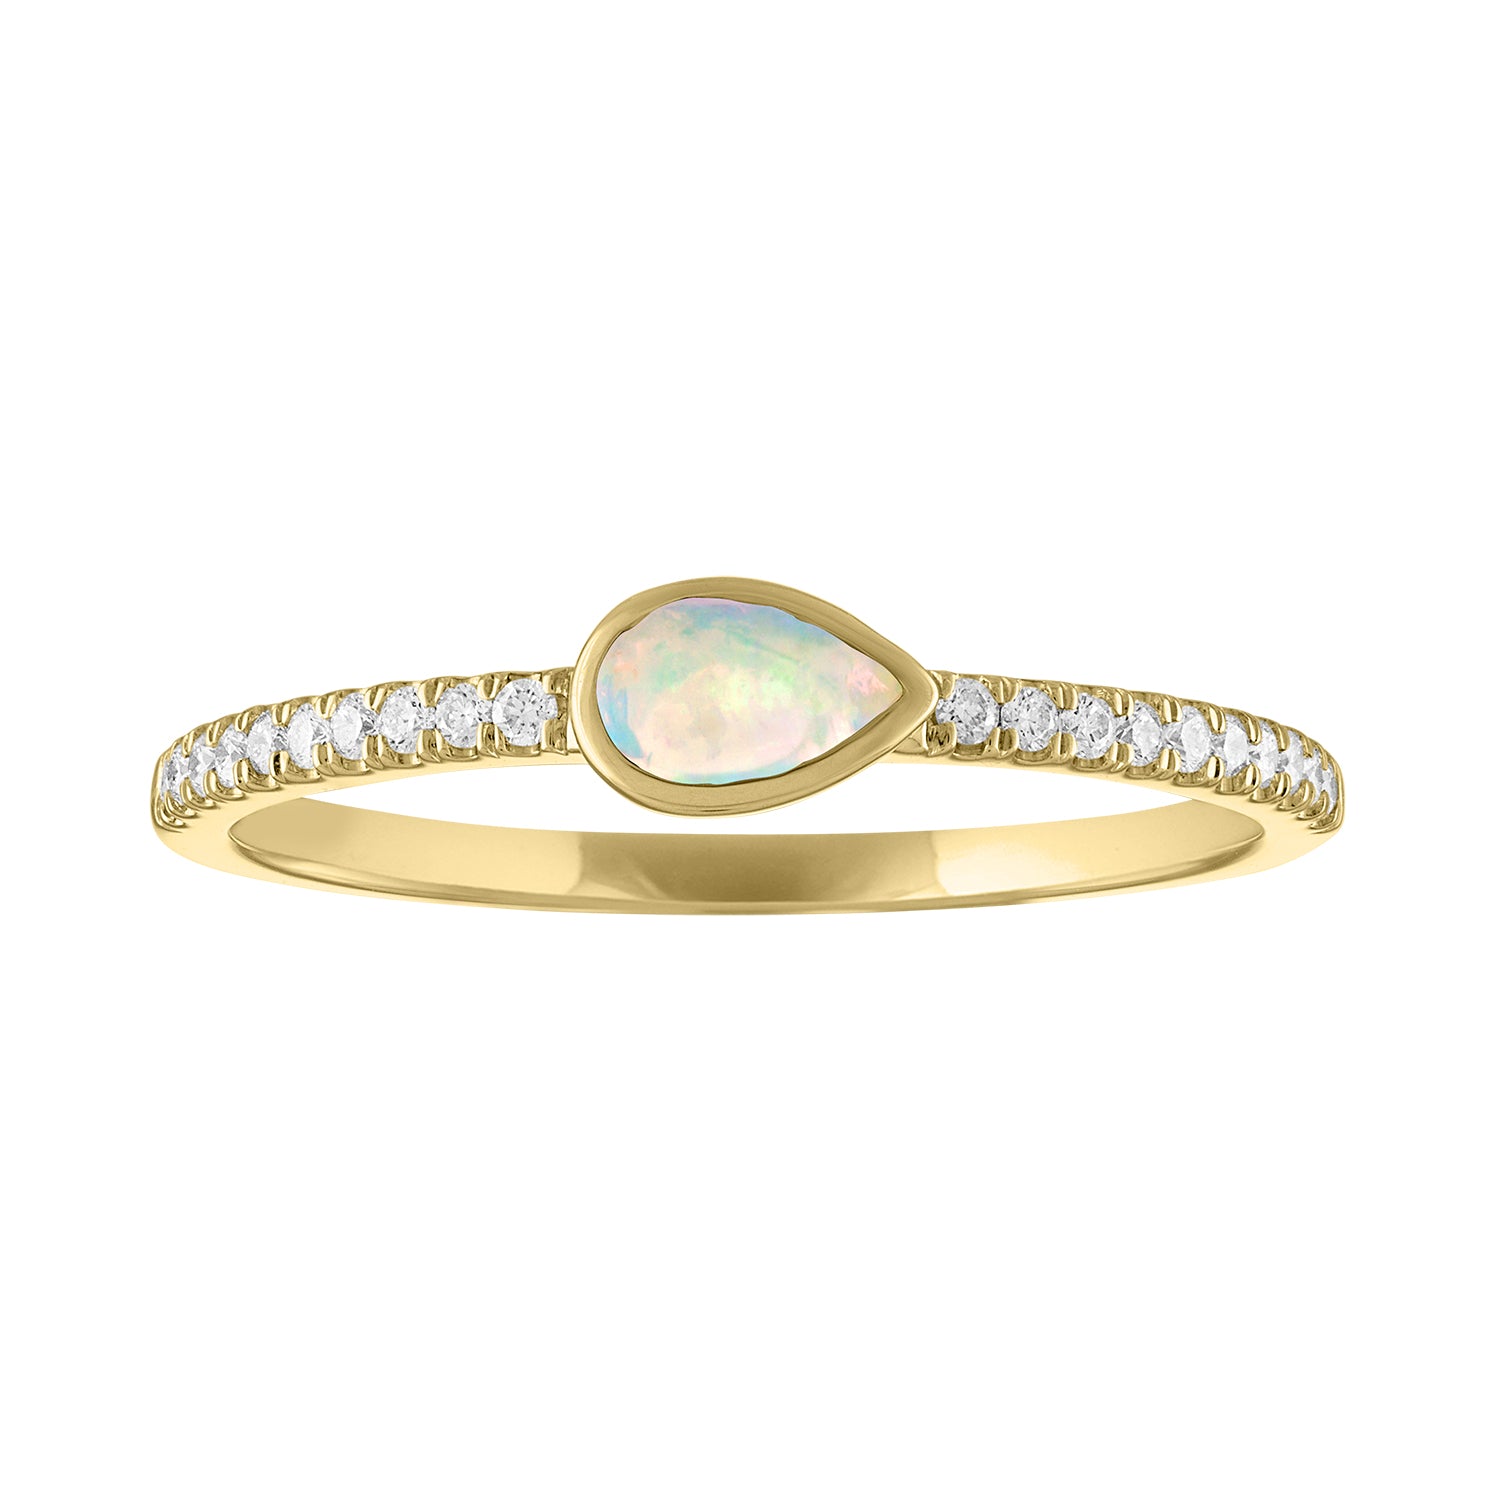 Yellow gold skinny band with a bezeled pear shape opal in the center and round diamonds on the shank. 